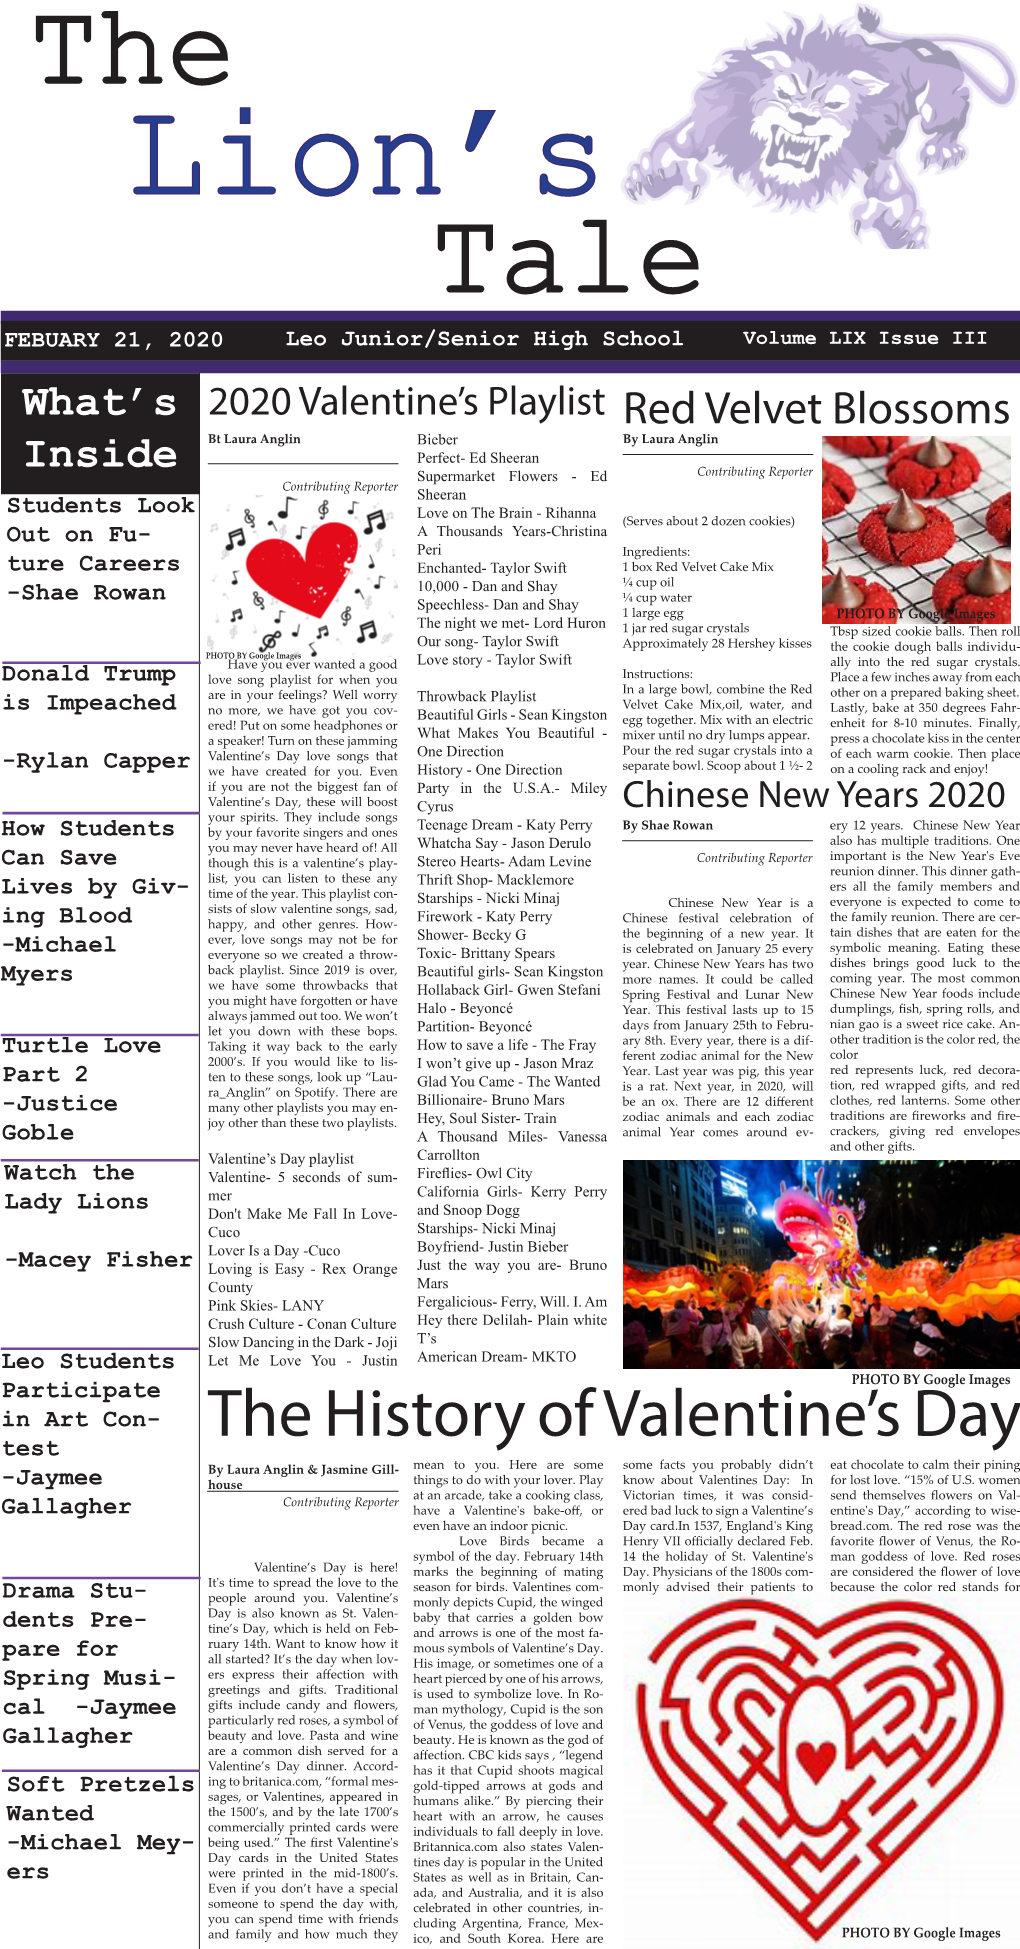 The History of Valentine's